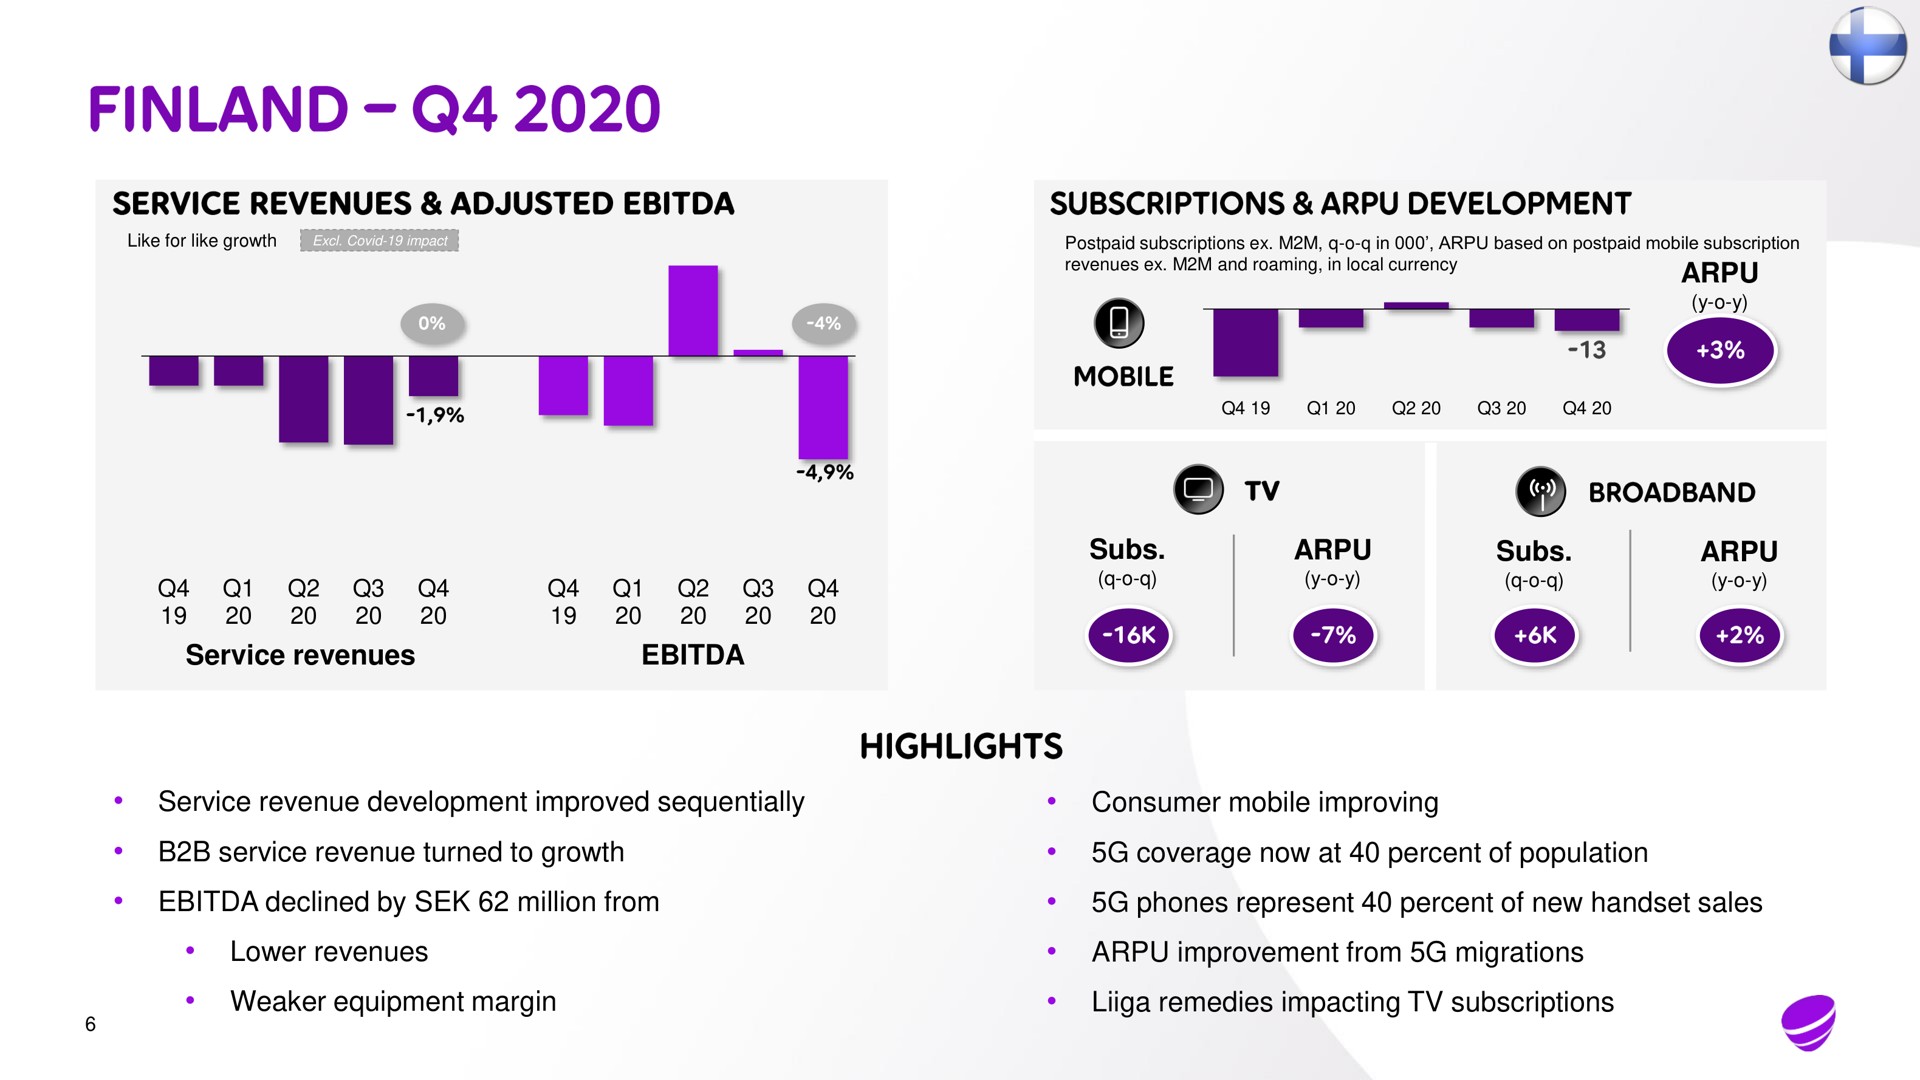 subs subs service revenues service revenue development improved sequentially consumer mobile improving service revenue turned to growth declined by million from lower revenues equipment margin coverage now at percent of population phones represent percent of new handset sales improvement from migrations remedies impacting subscriptions finland | Telia Company